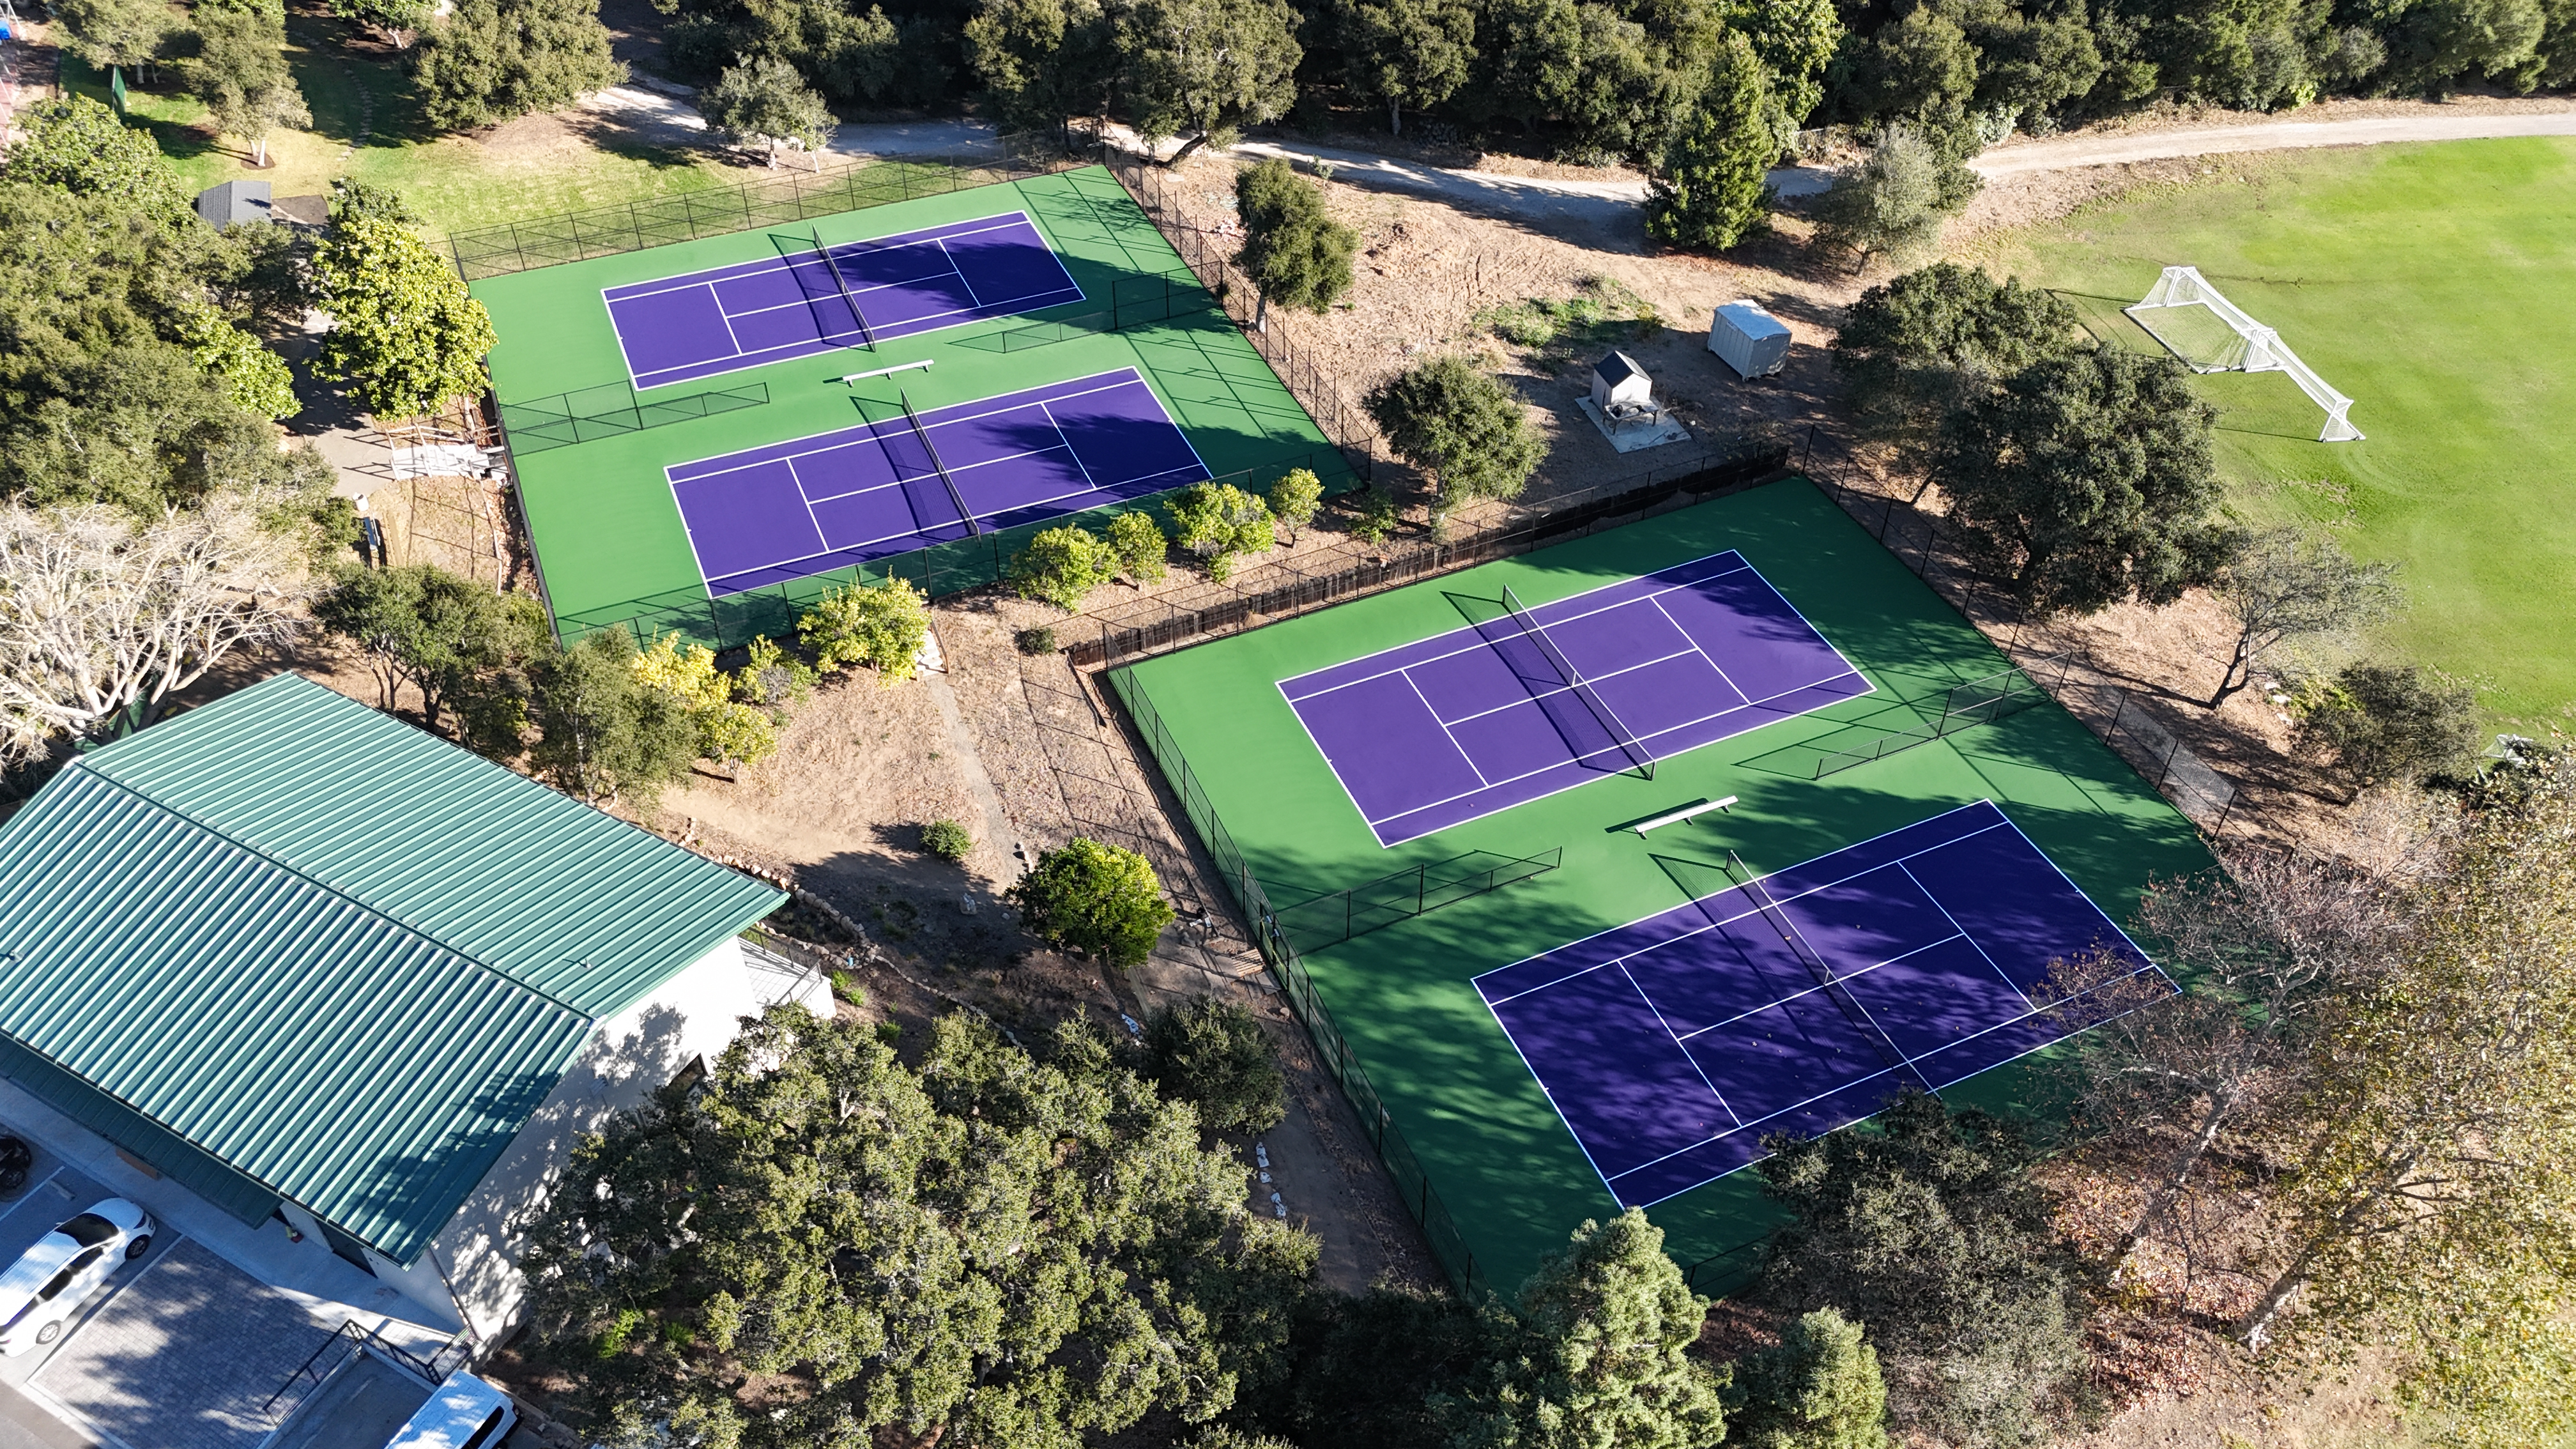 Fully Renovated Tennis Courts and New Viewing Area